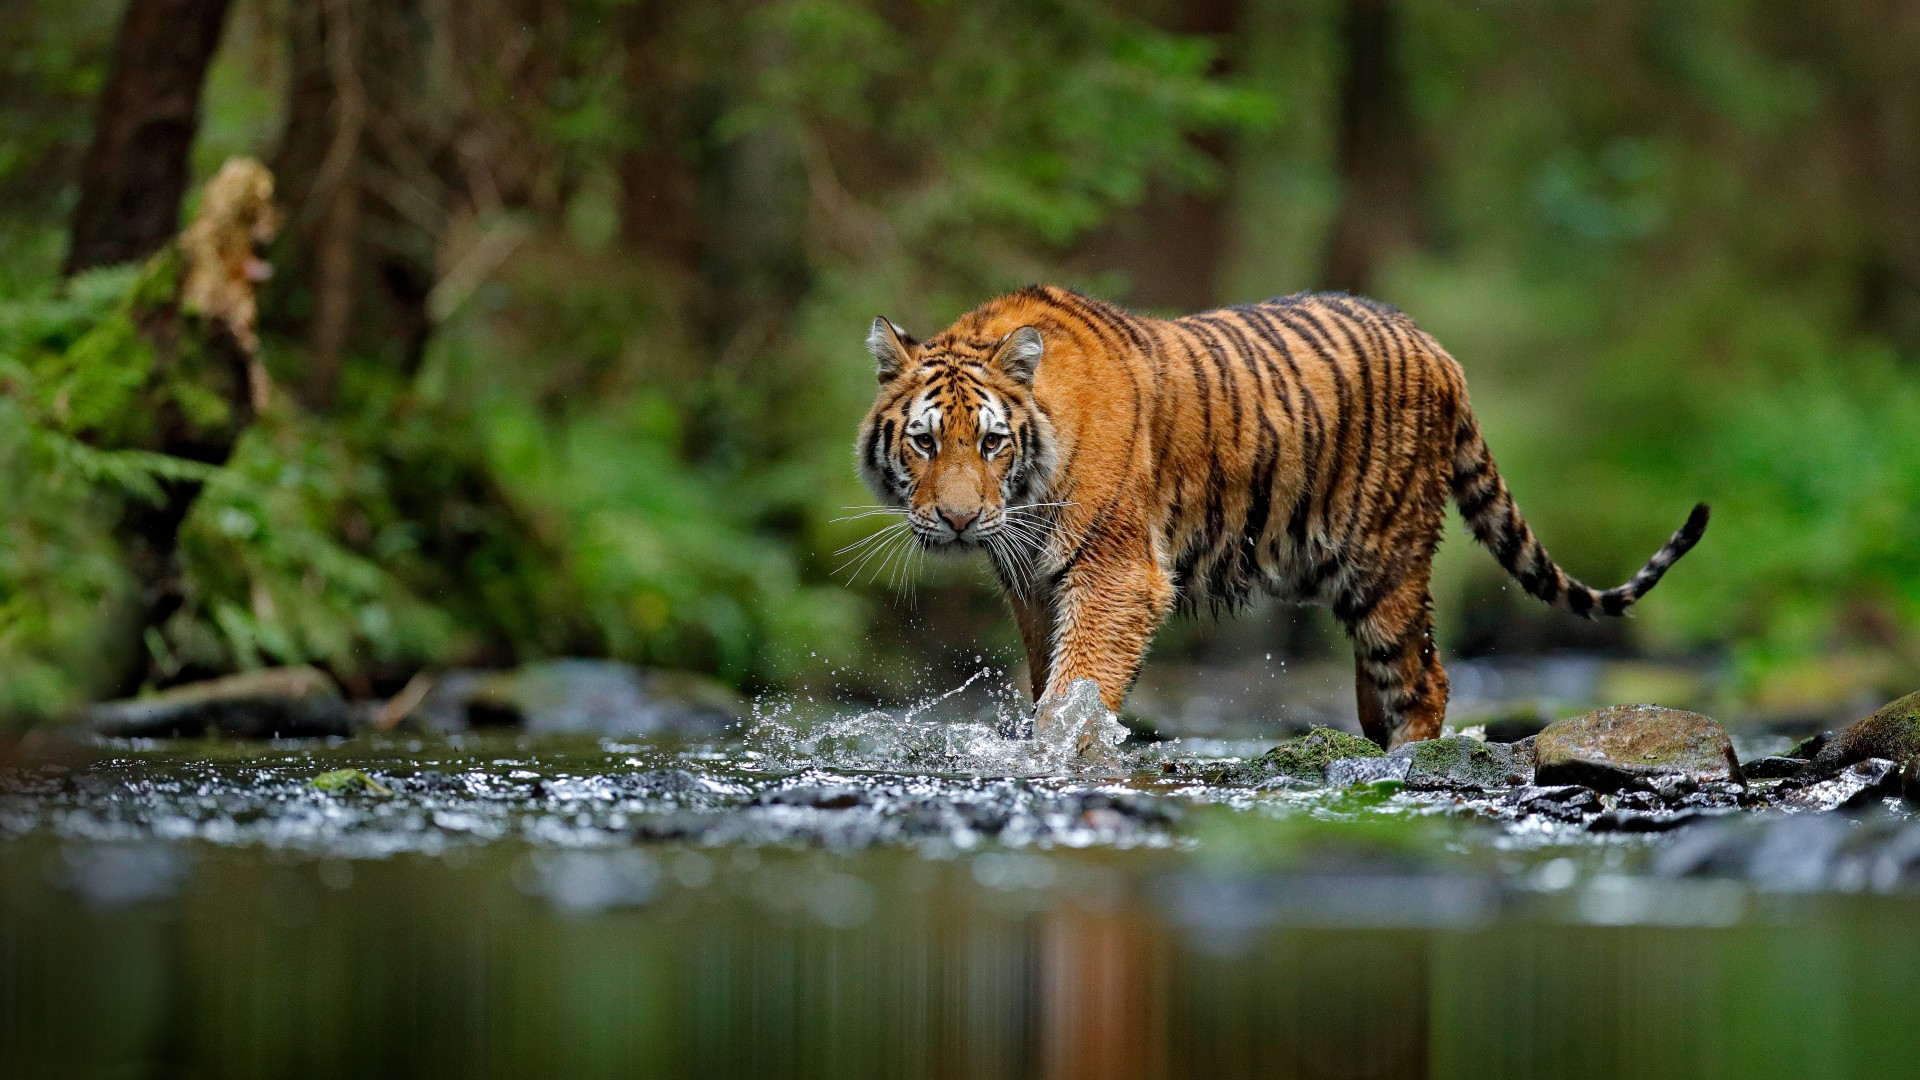 A tiger walking through a river in a forest.